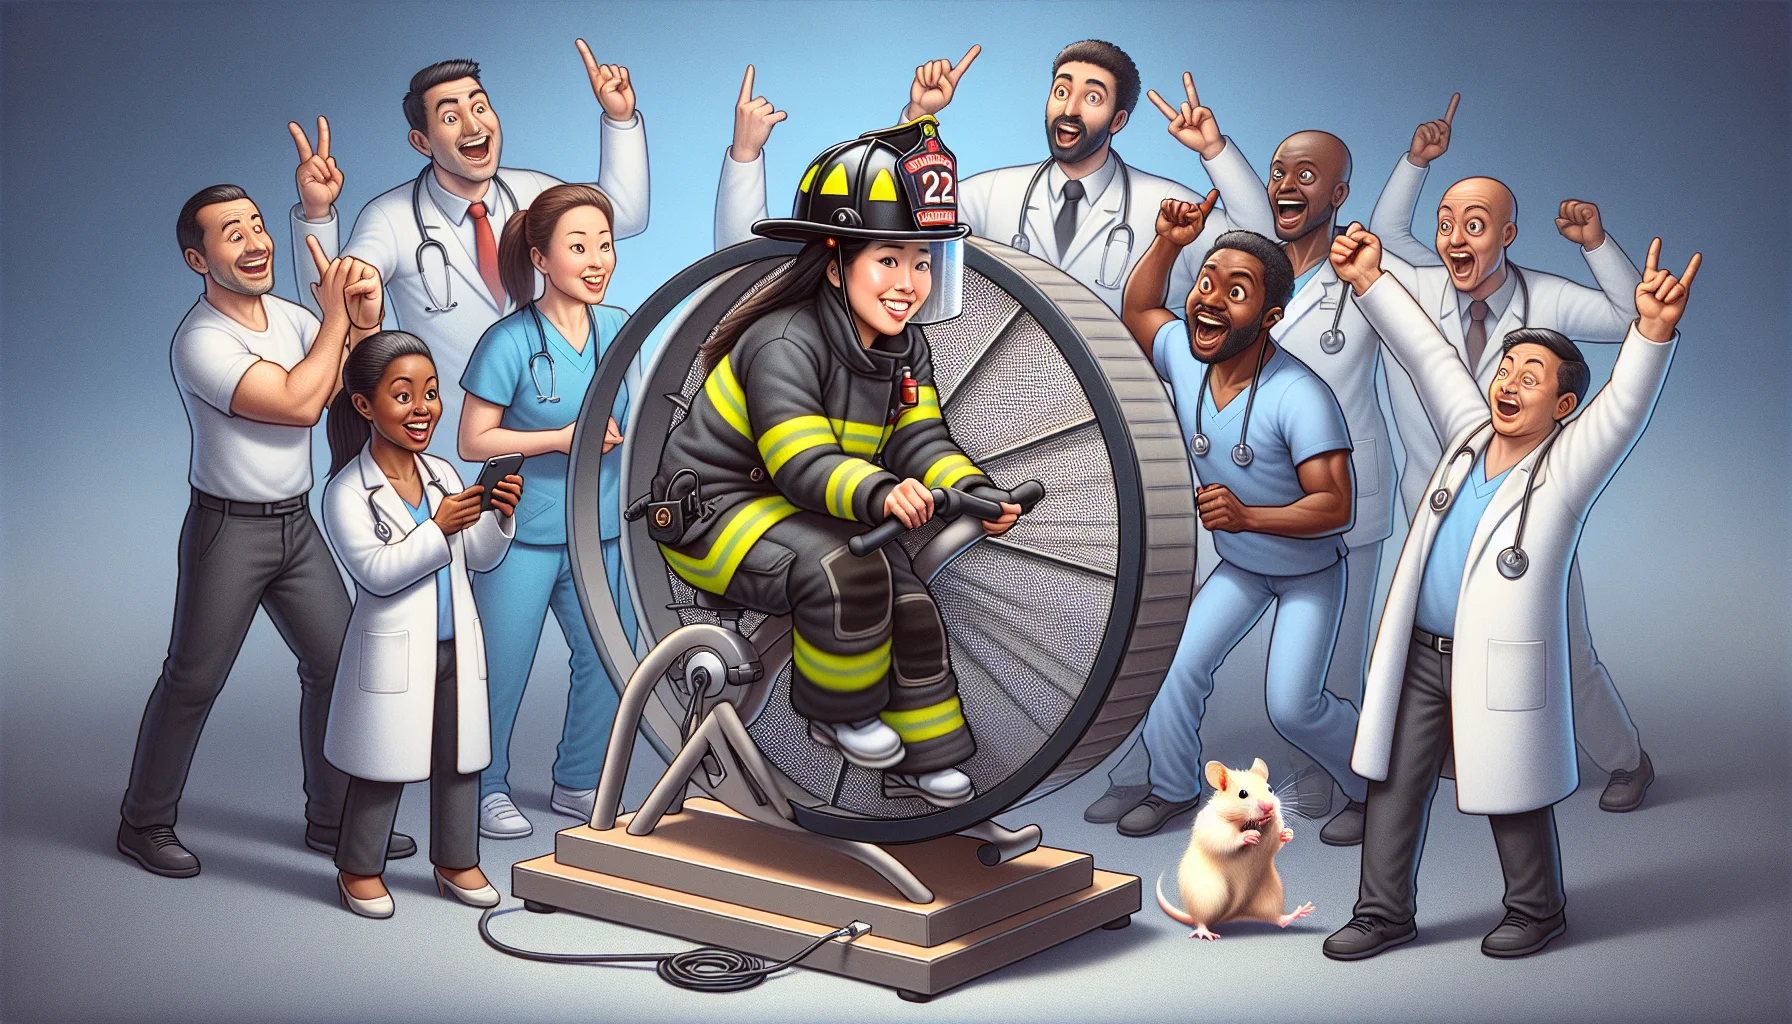 Create a humorous yet realistic image showcasing an unrelated category in an unconventional scenario promoting electricity generation. Illustrate a firefighter, an Asian woman, trying to generate electricity by pedaling on an exercise bike while a team of Black and Middle-Eastern doctors, consisting of both men and women, are enthusiastically cheering her on. A giant hamster wheel with a hamster next to it humorously suggests the idea that humans can also generate electricity similar to hamsters.